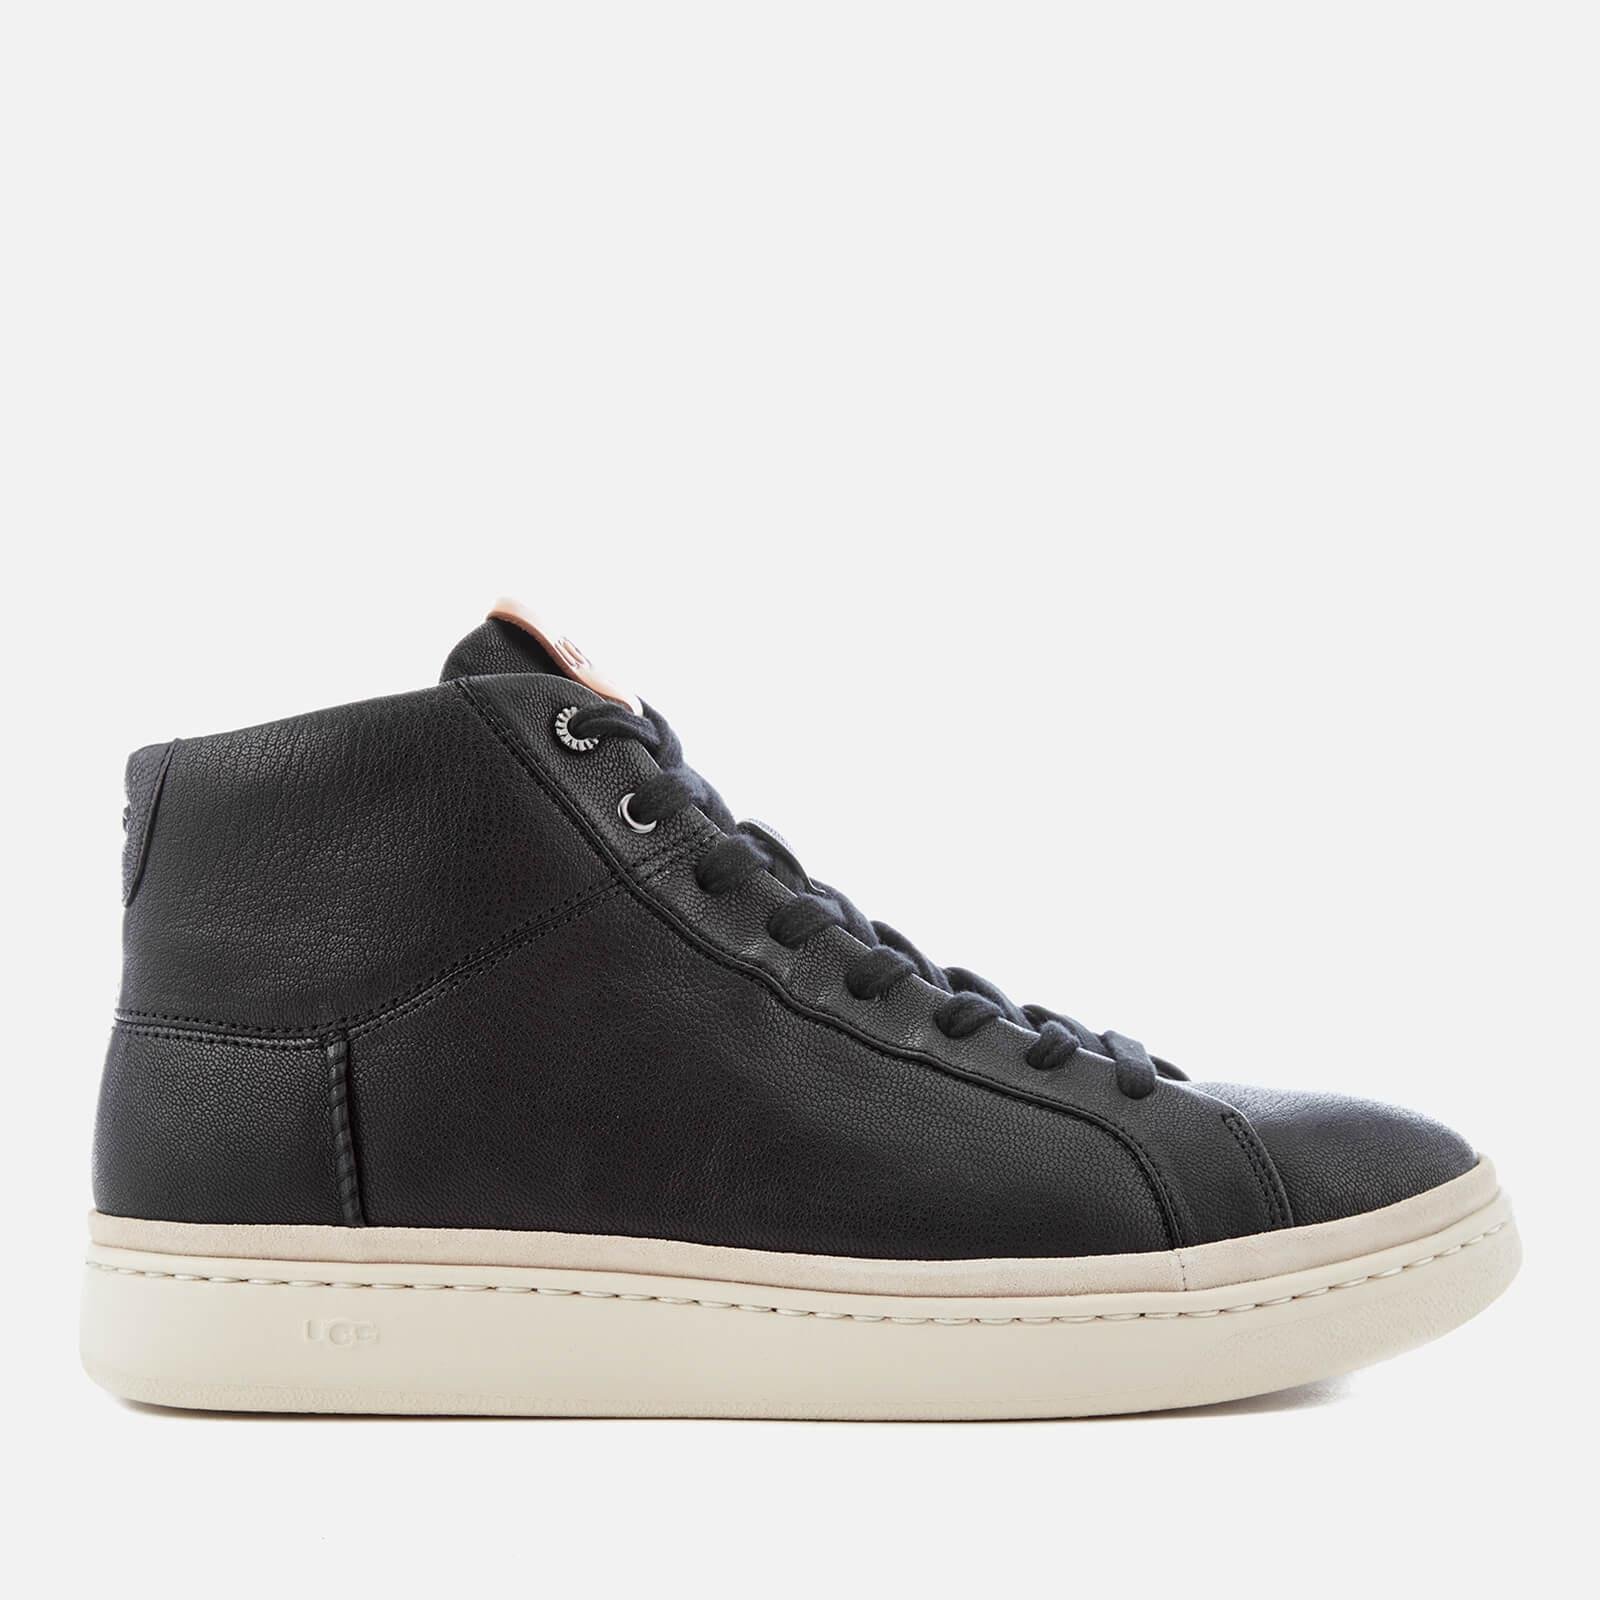 UGG Cali Lace High Top Trainers in Black for Men - Lyst